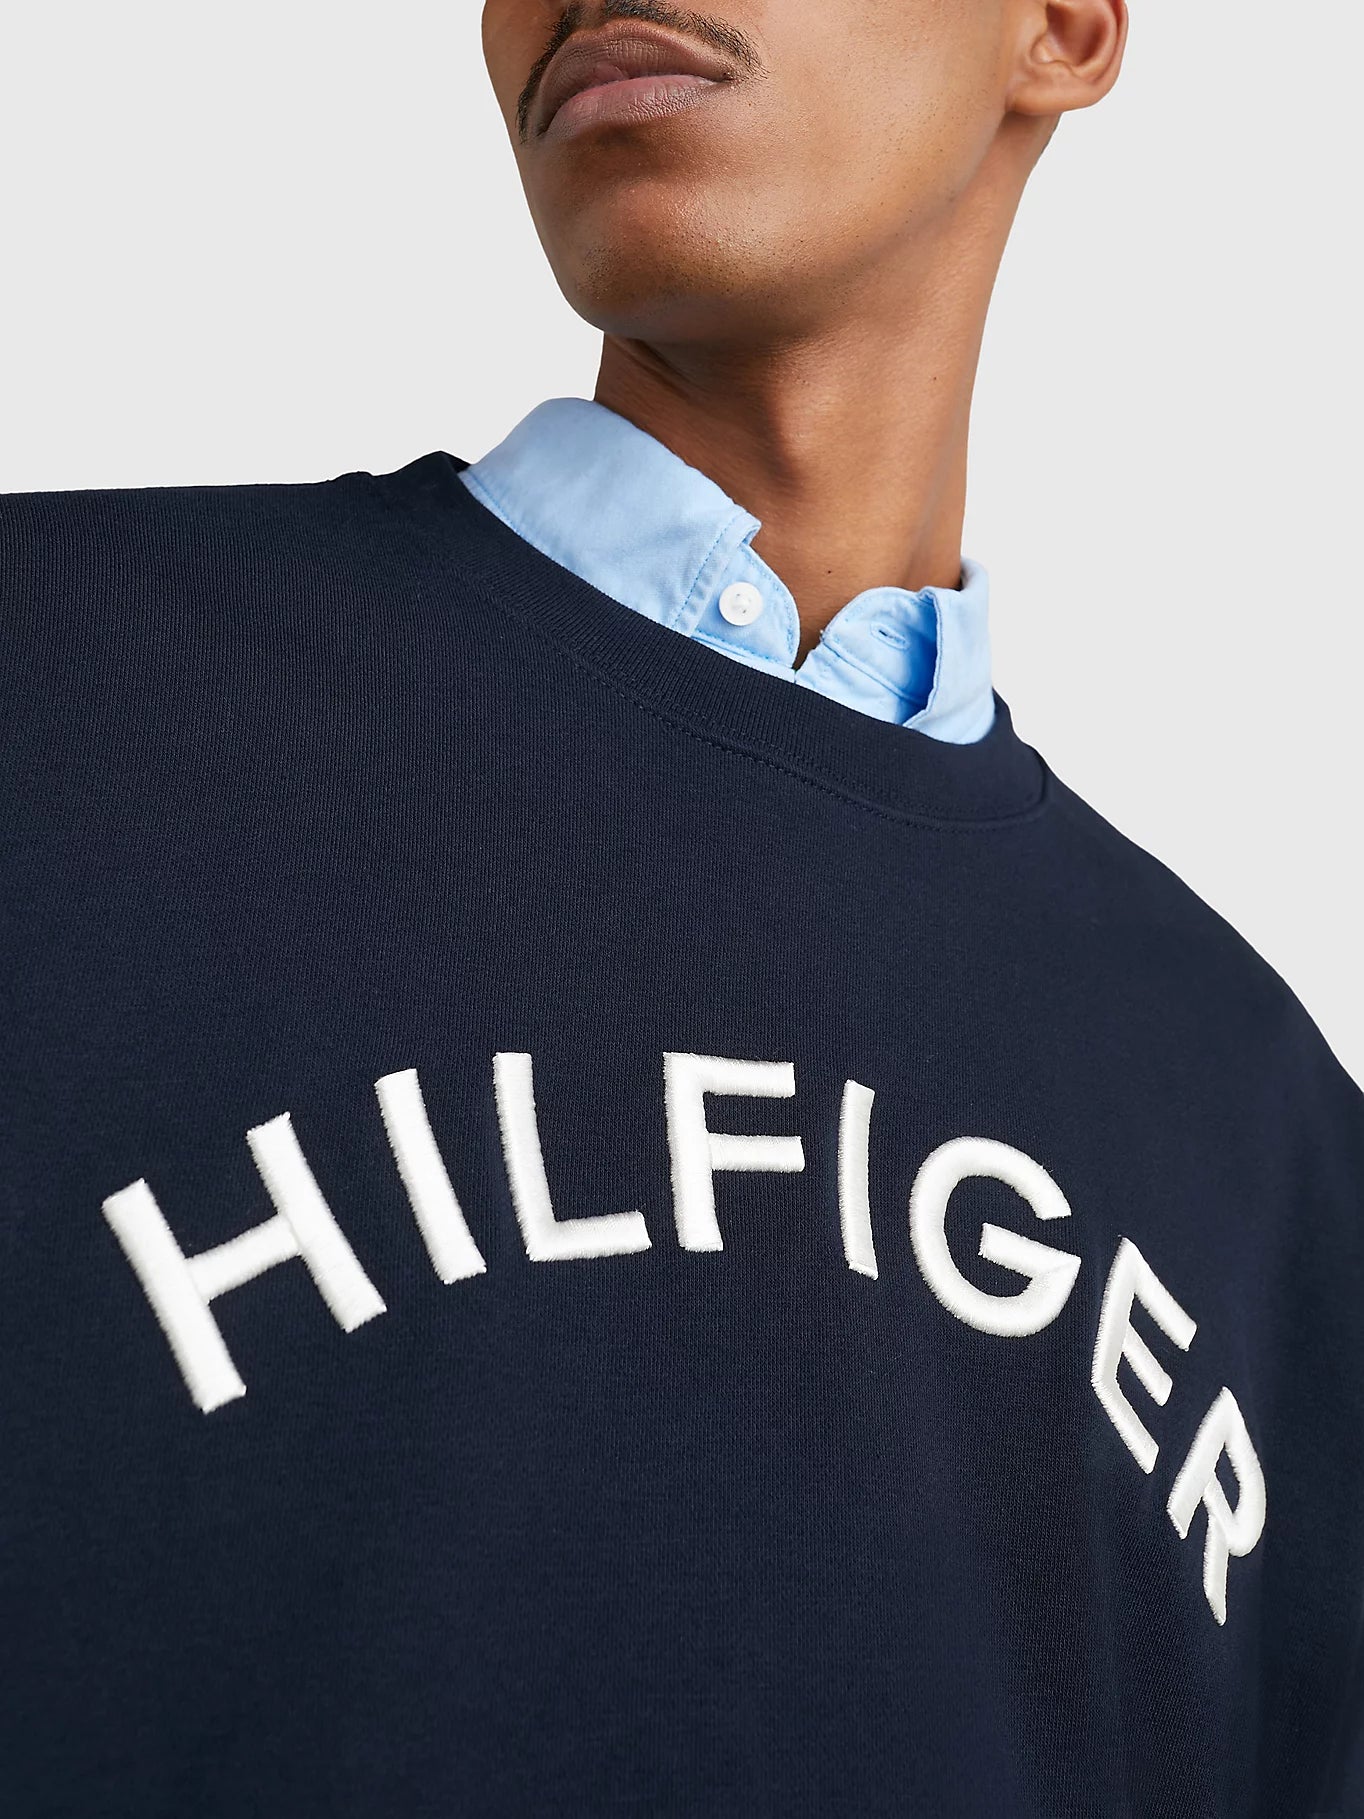 Sweat Tommy Hilfiger marine pour homme I Georgespaul